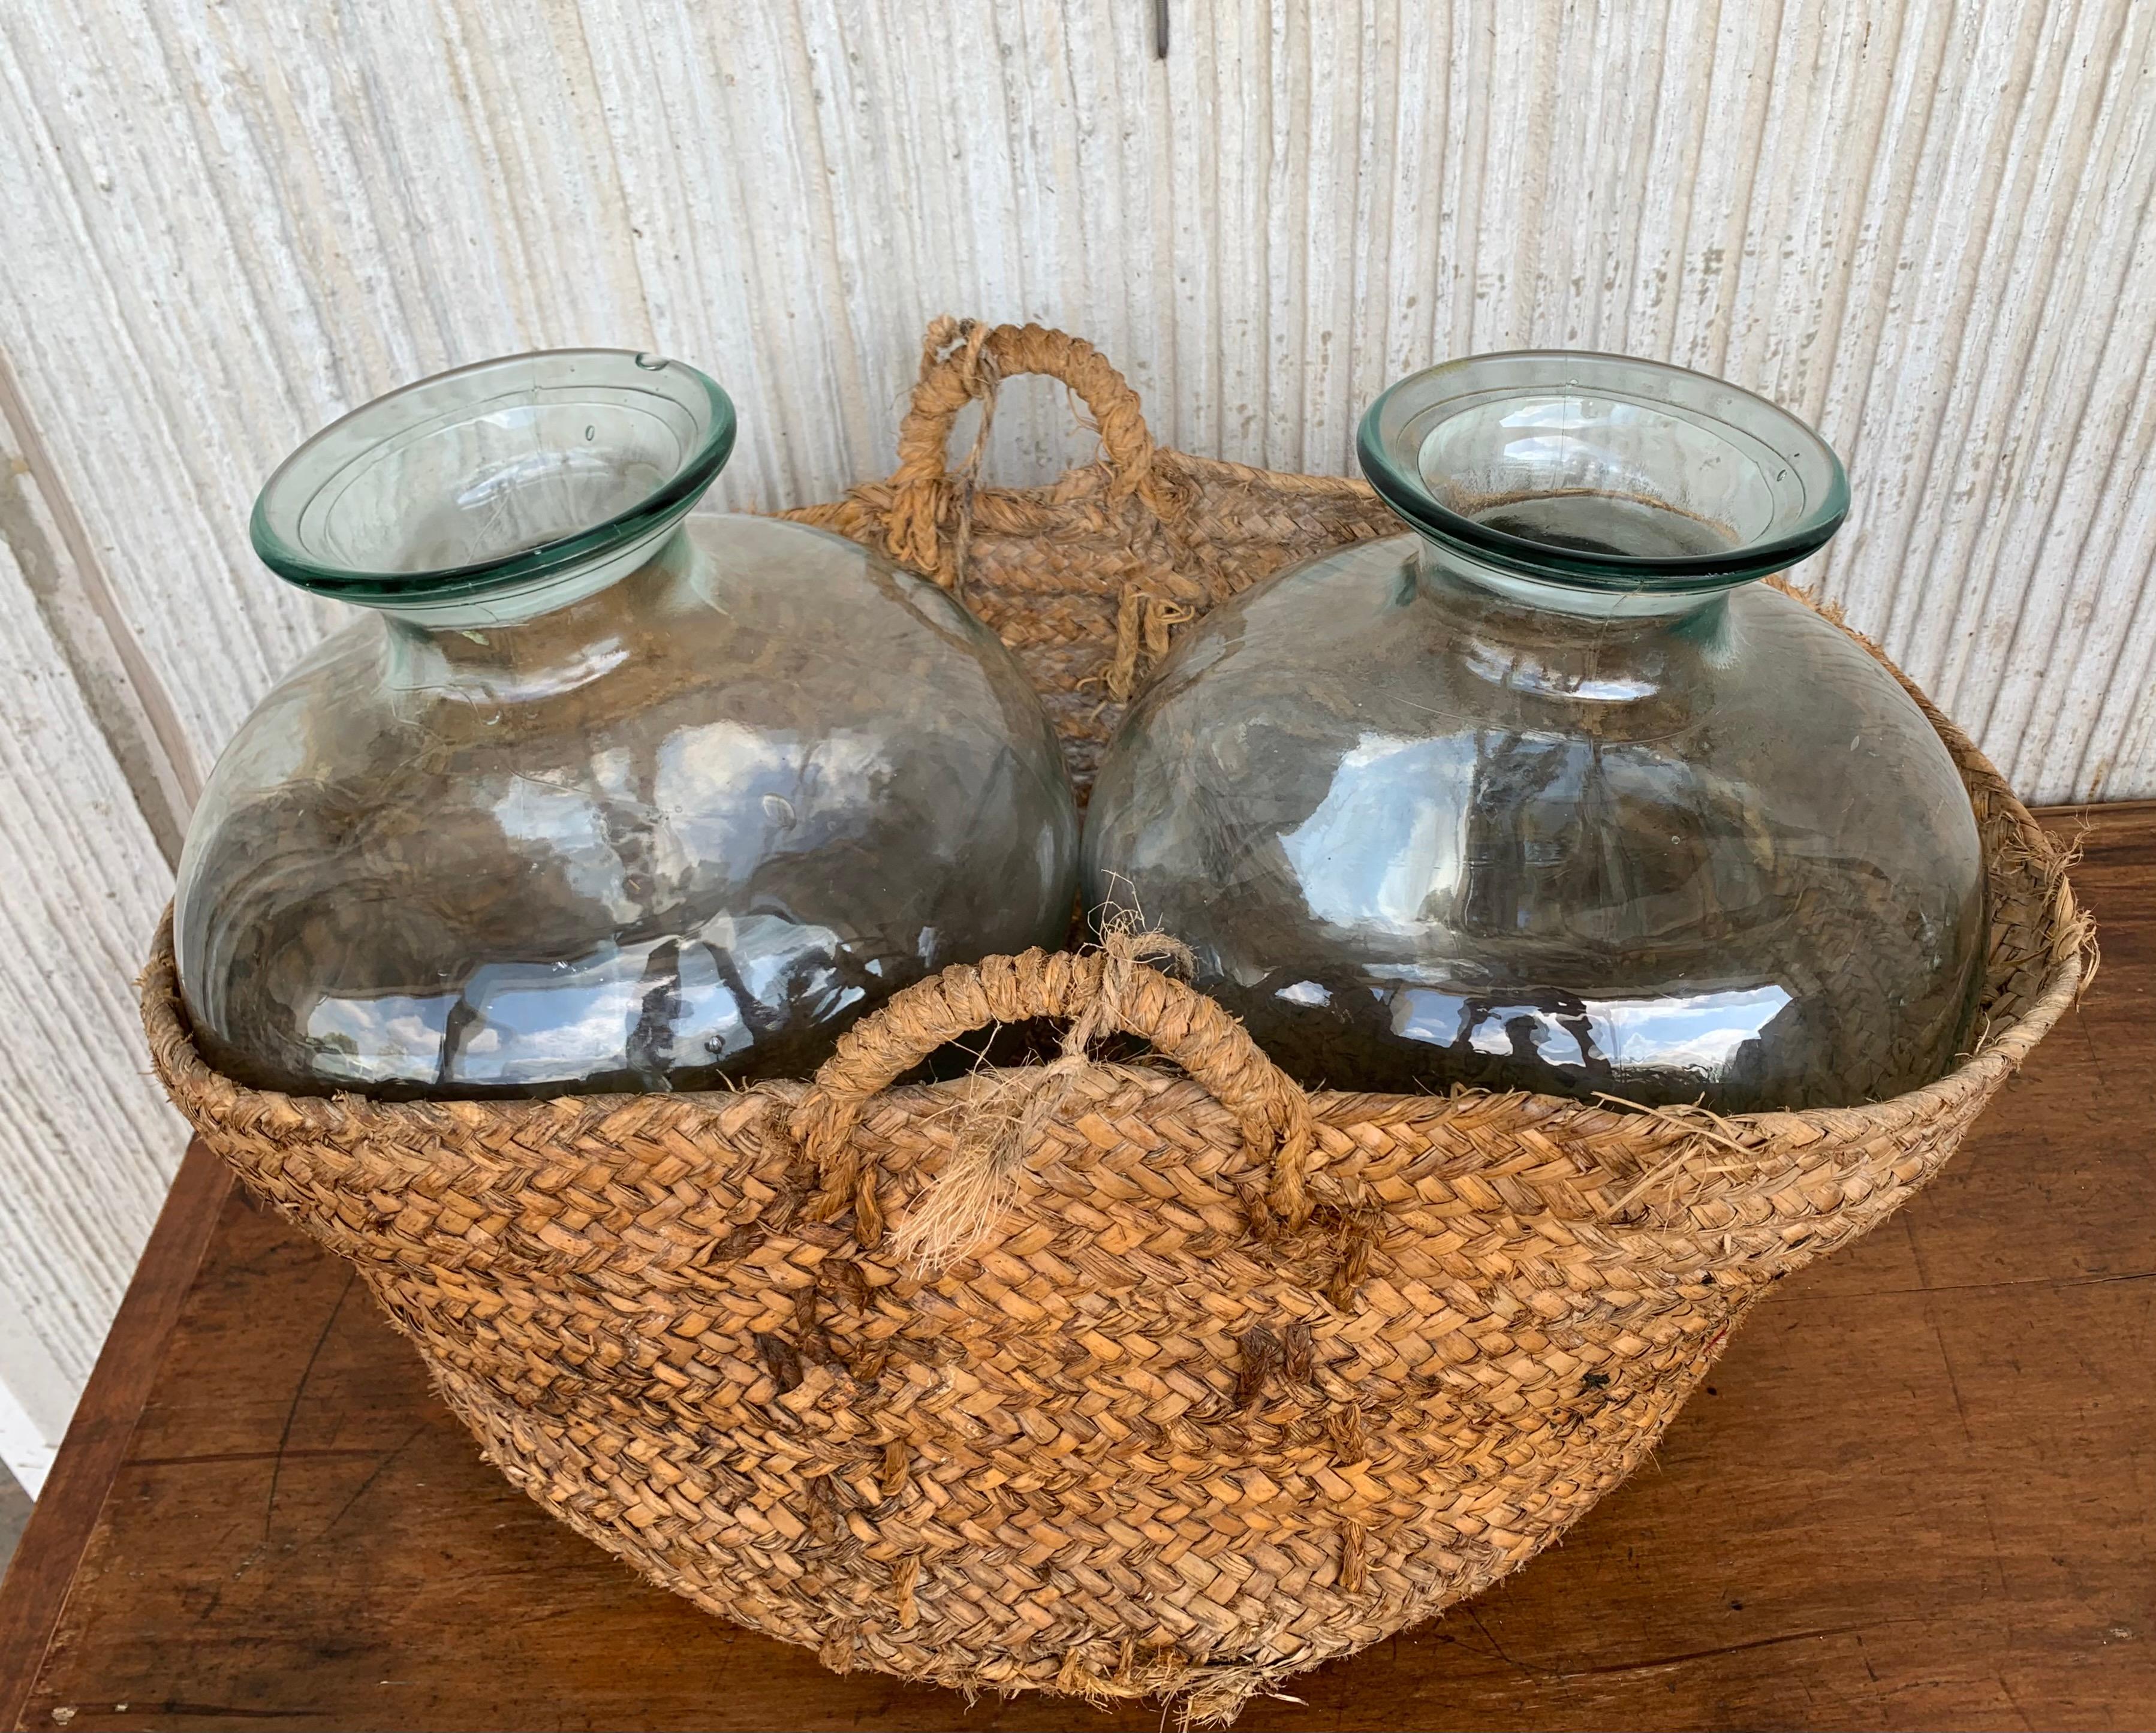 Spanish Colonial Set of 2 Green Glass French Demijohn Bottles with Woven Esparto Basket For Sale